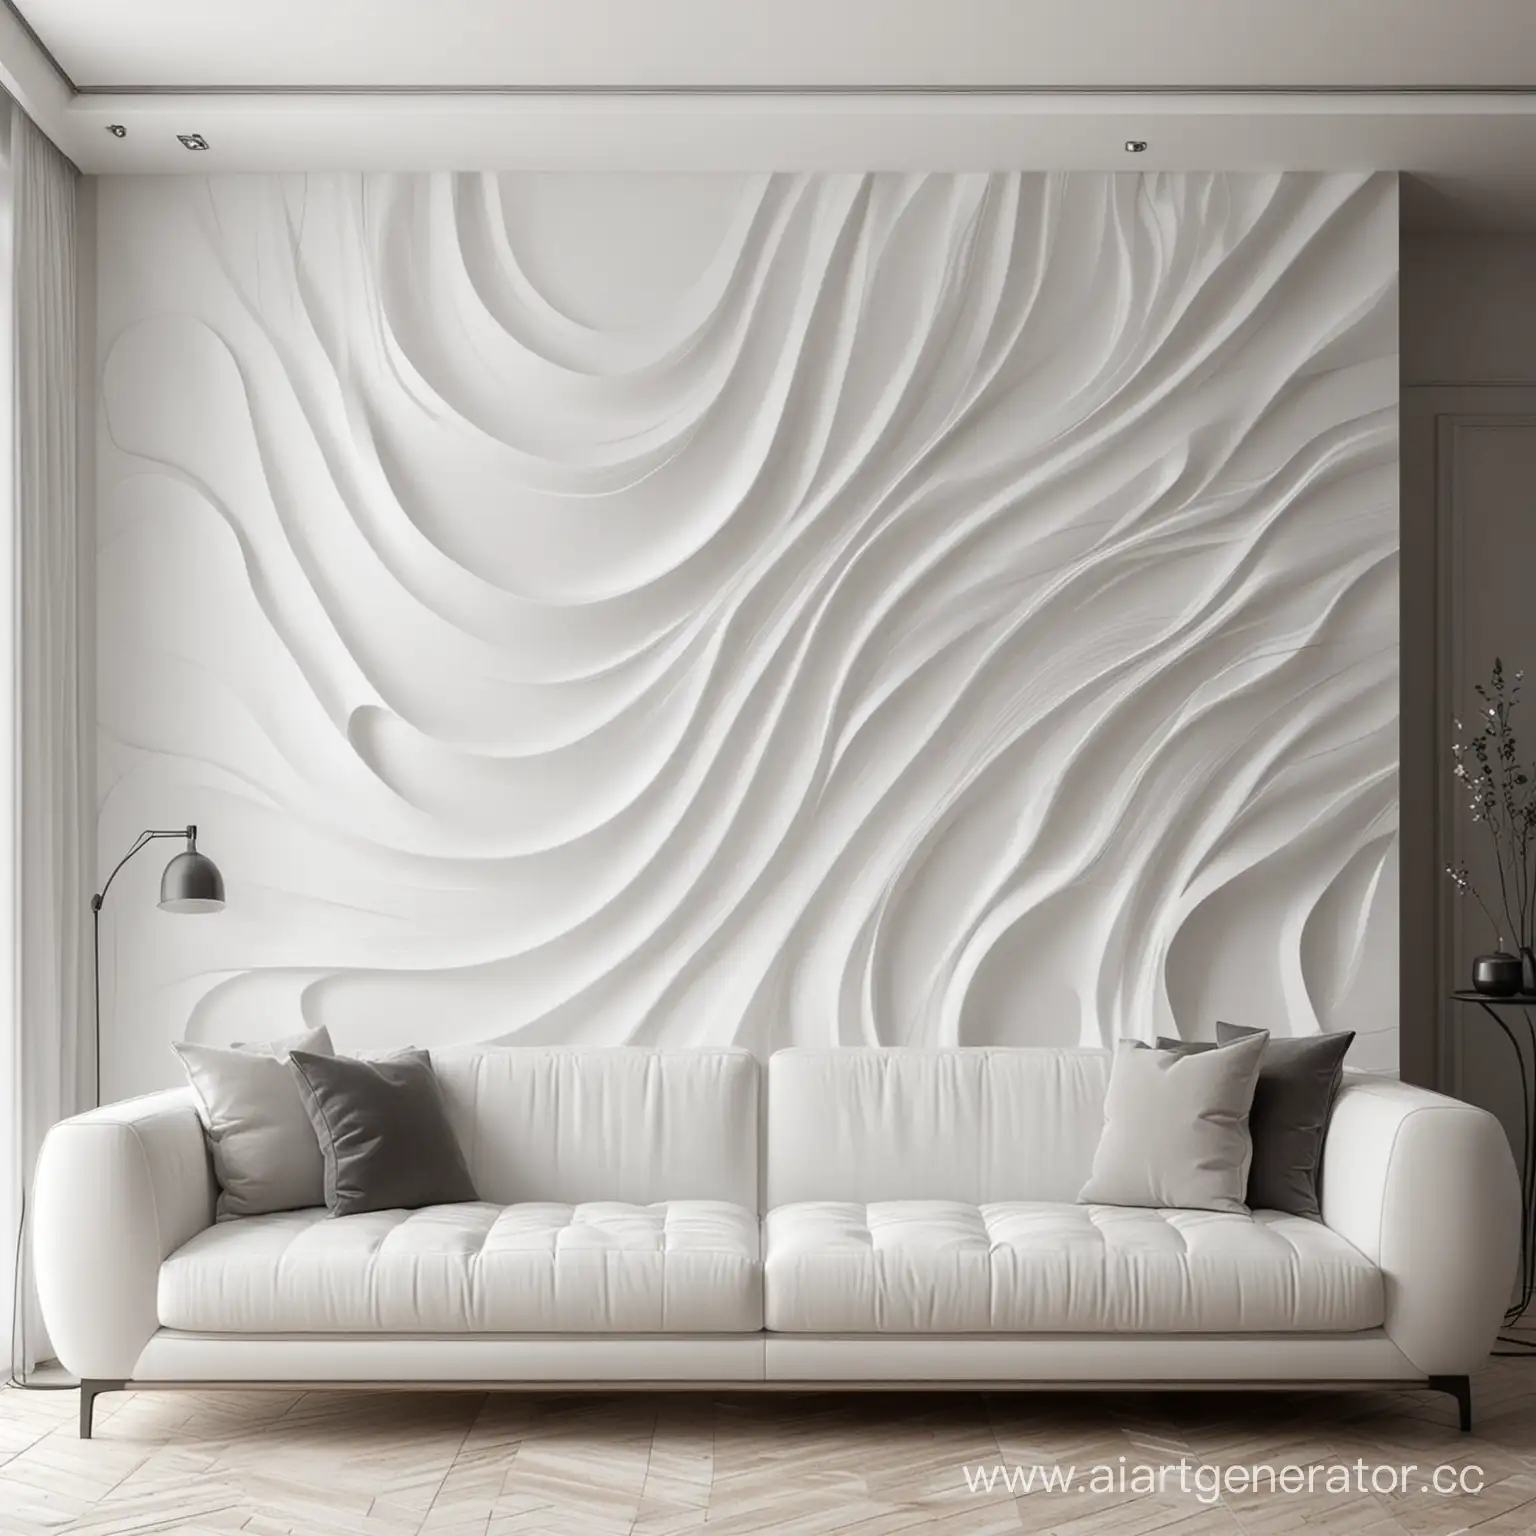 Abstract-Volumetric-Wall-Panel-Decoration-in-White-or-Black-Interior